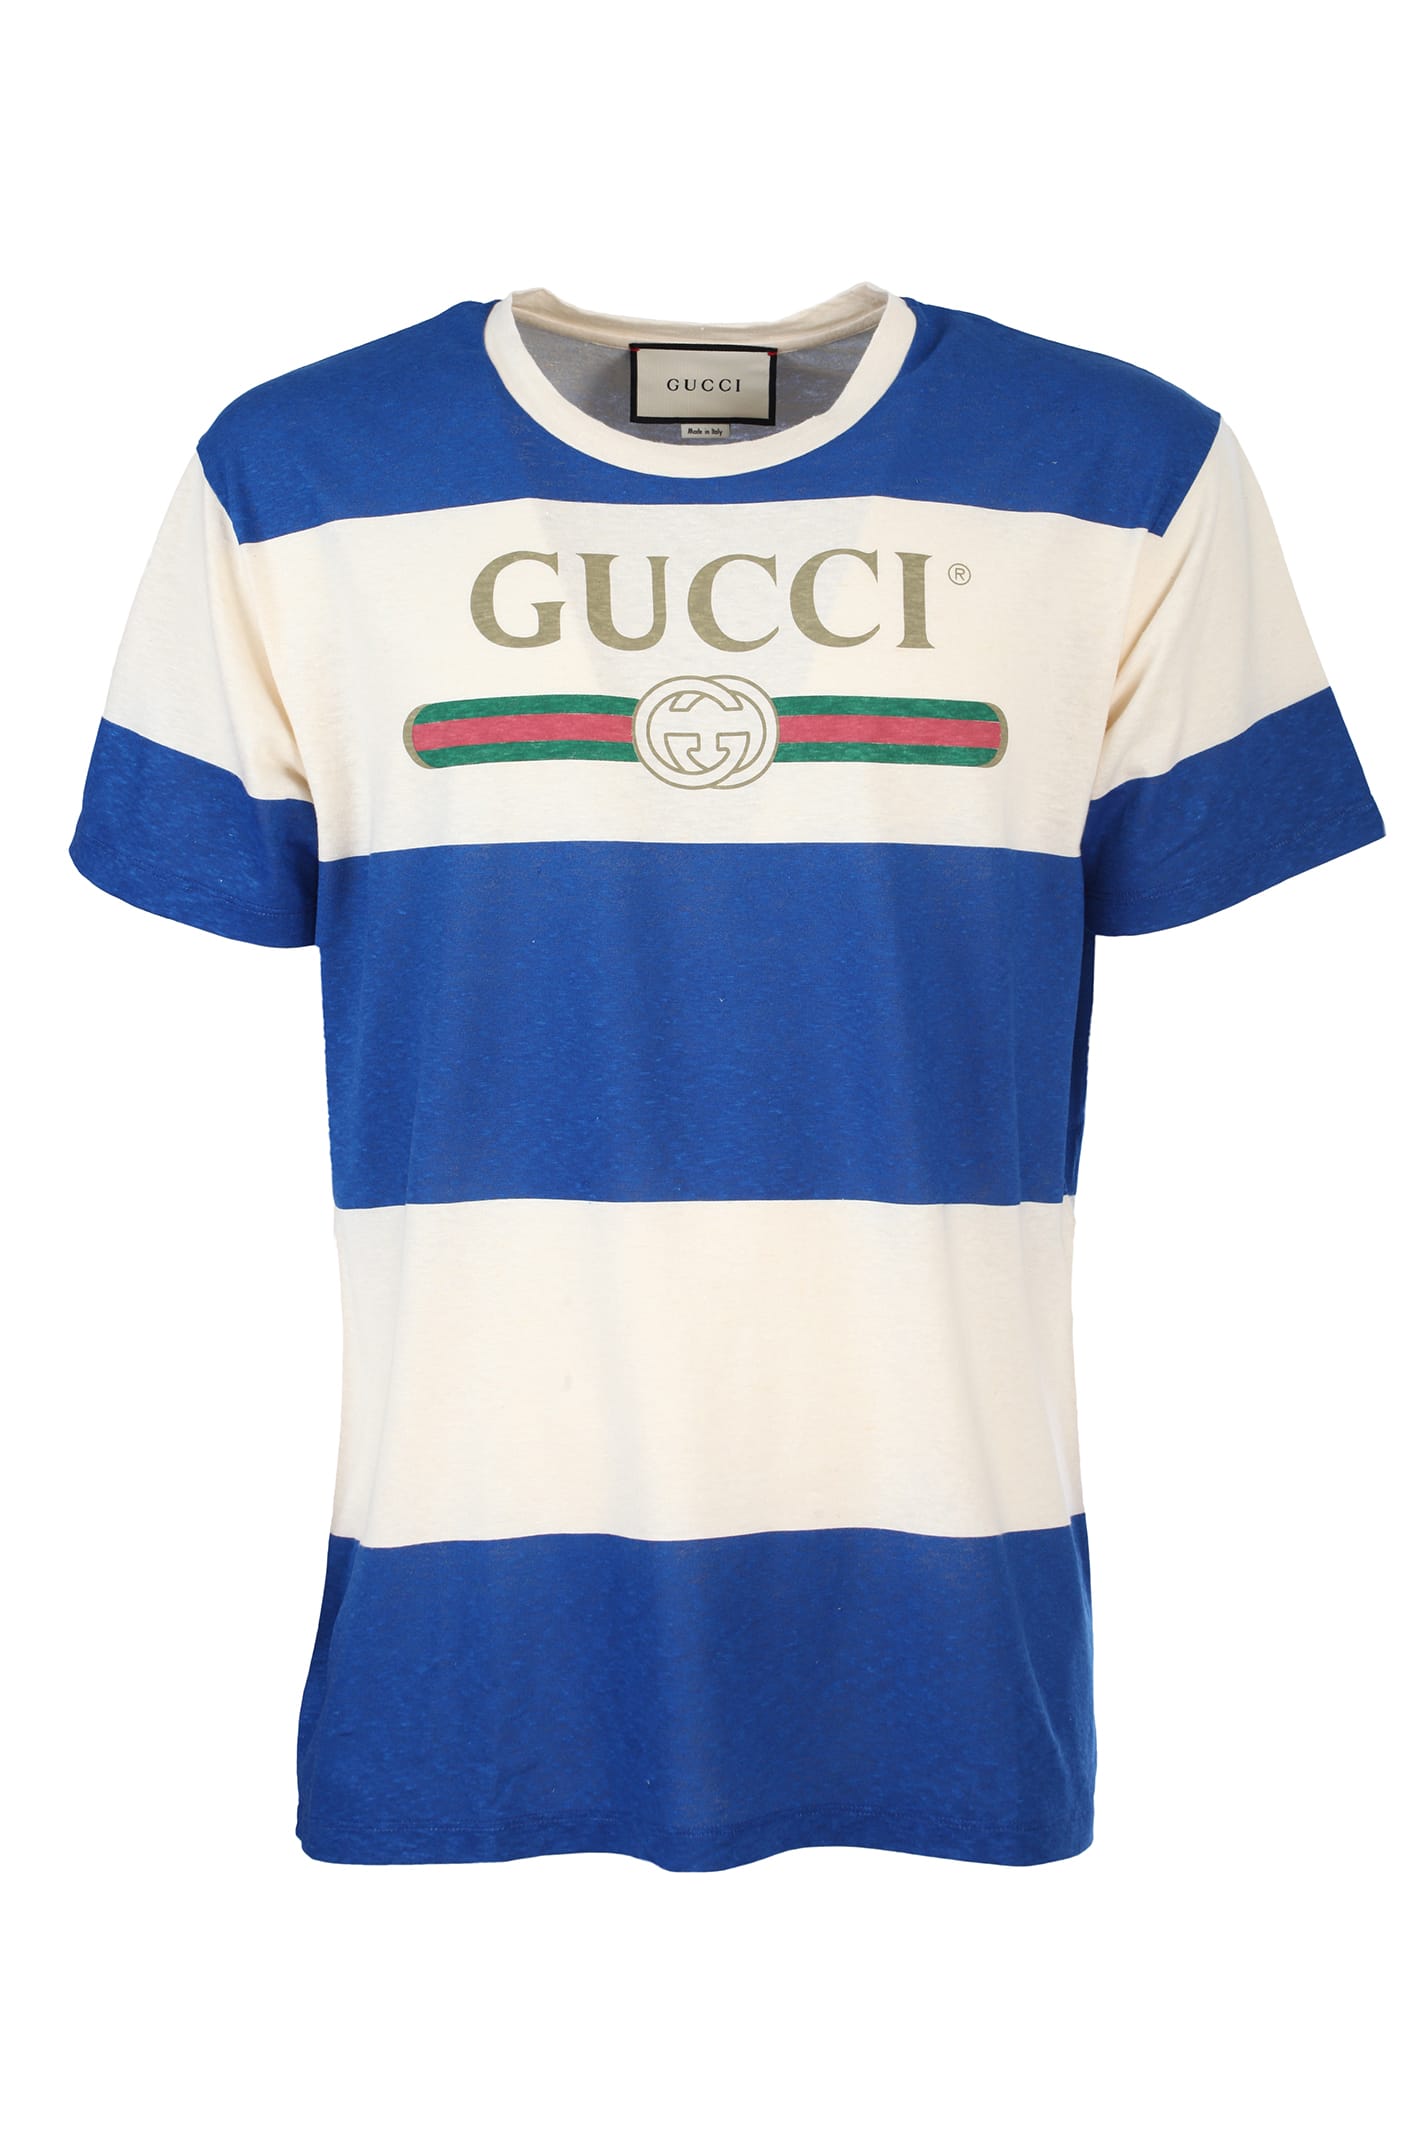 GUCCI WHITE AND BLUE STRIPED T-SHIRT,11283809